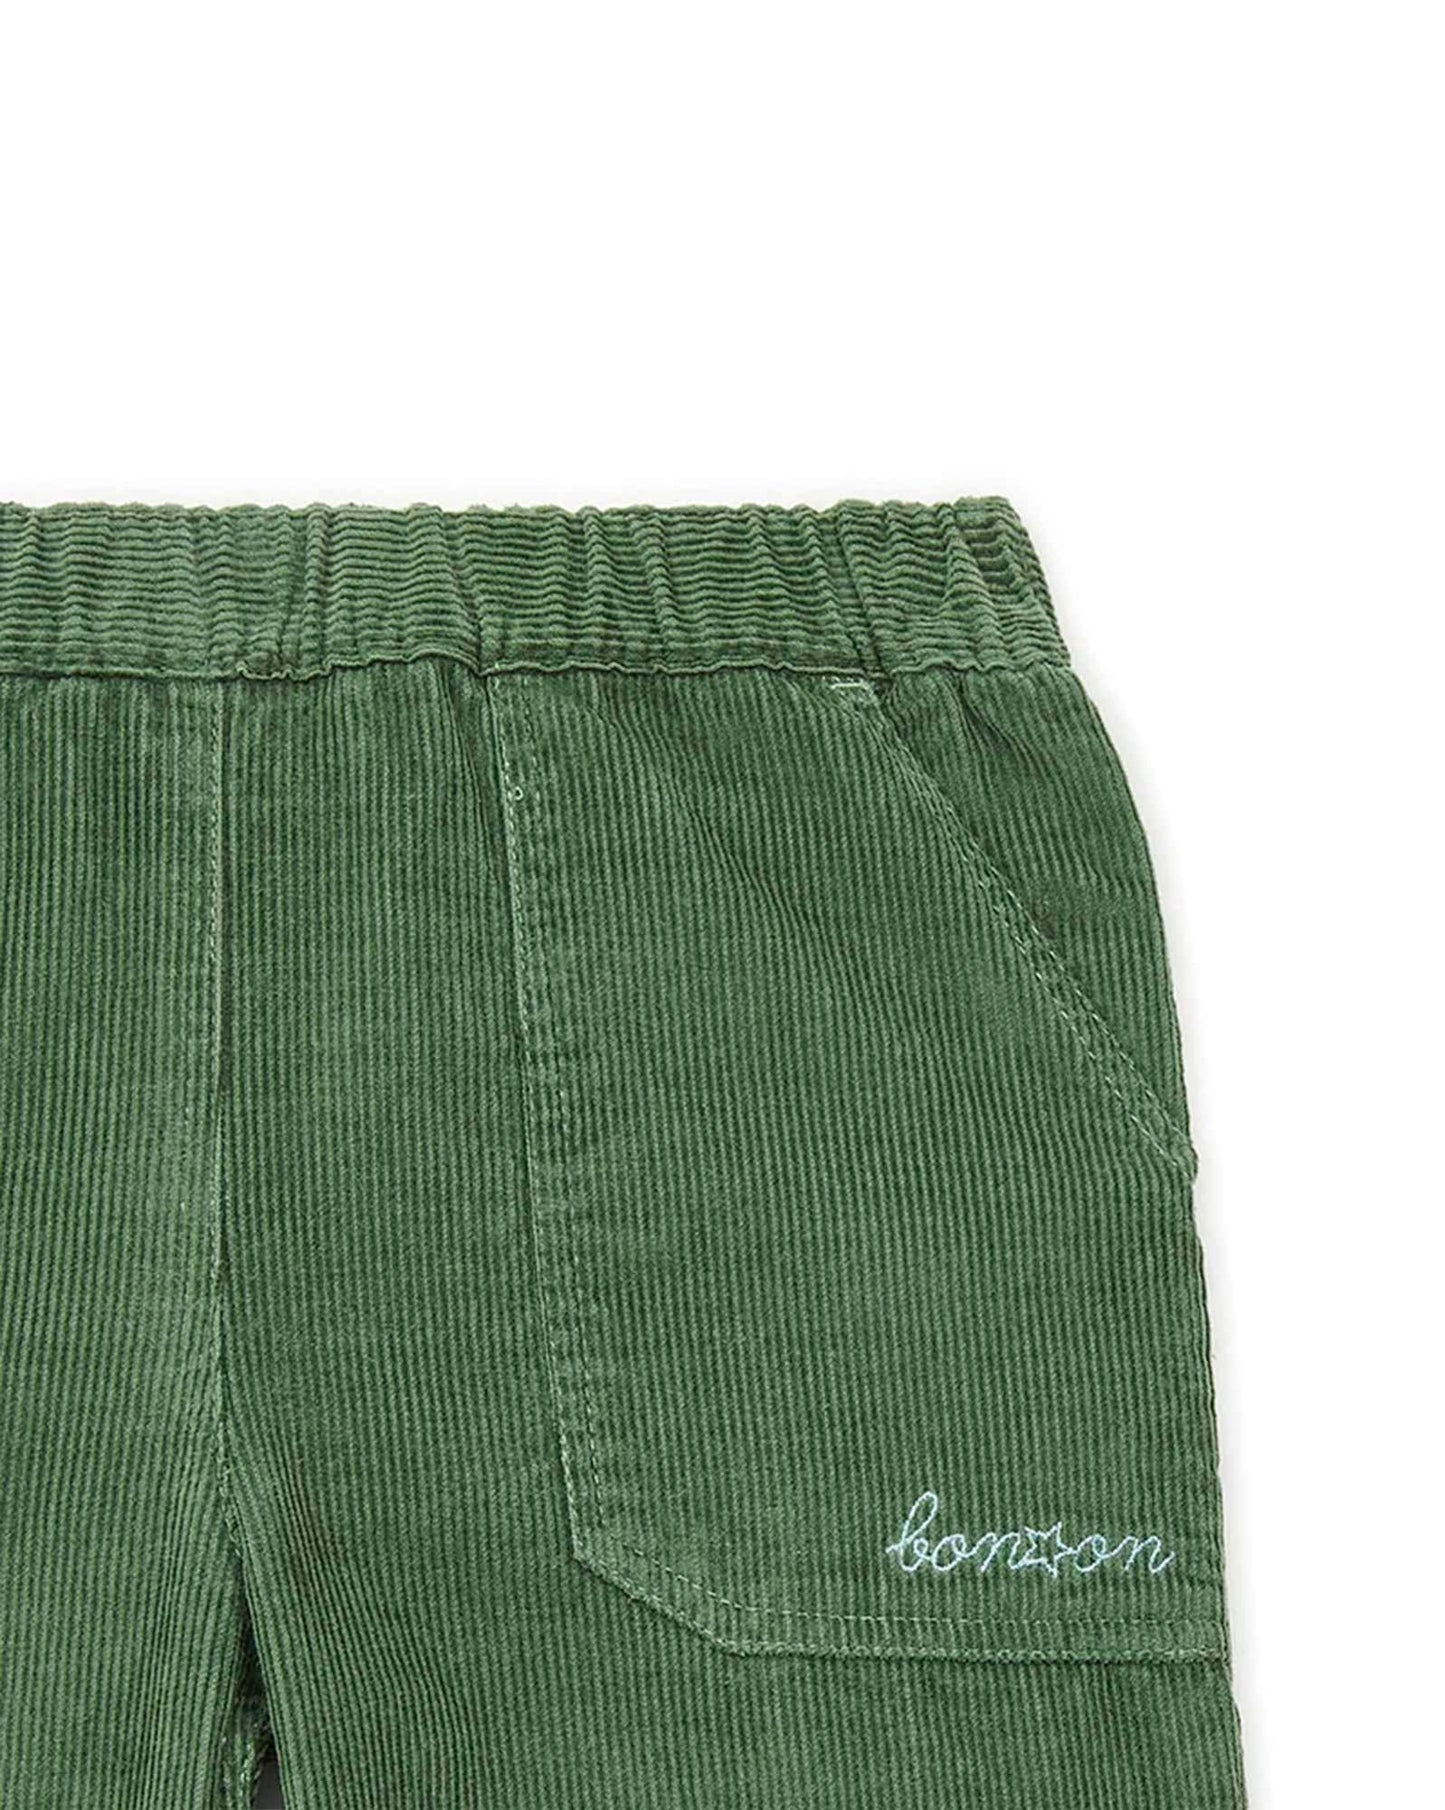 Trousers Batcha Green in tweed cotton